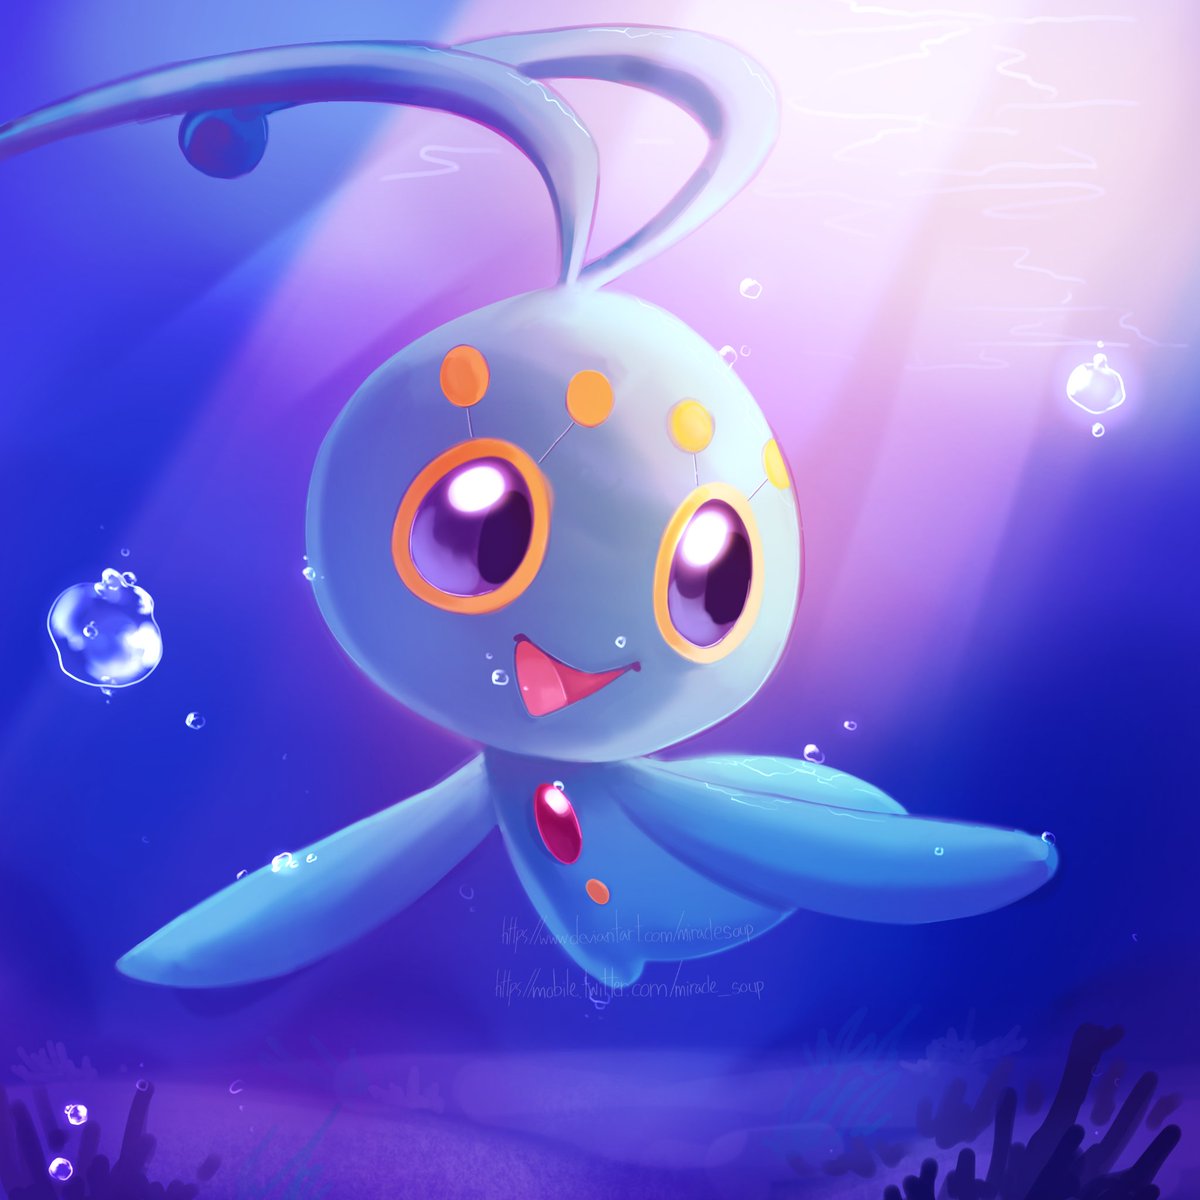 Soup Daily Pokemon 490 日常ポケモン 490 Time 1 Hour And 2 Minutes 1時間2分 I Like Drawing Bubbles 泡を描くのが好きですよ T Co Kel5xo4wzh Pokemon ポケモン Dailypokemon Dailydrawing Manaphy マナフィ T